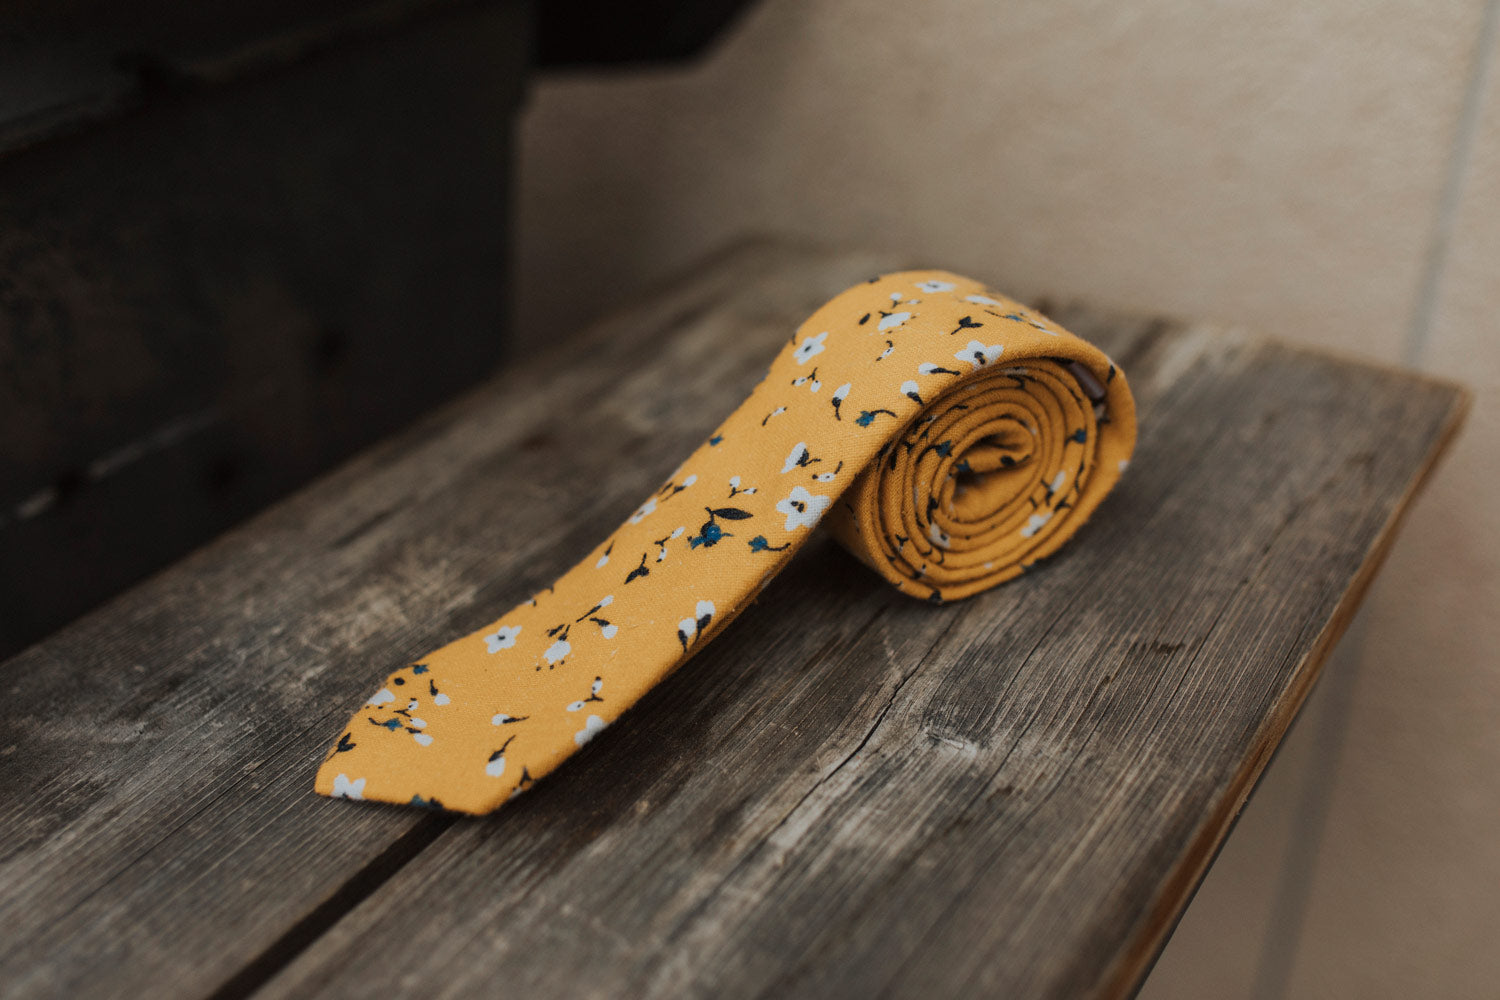 Marigold tie sitting on a wooden bench.